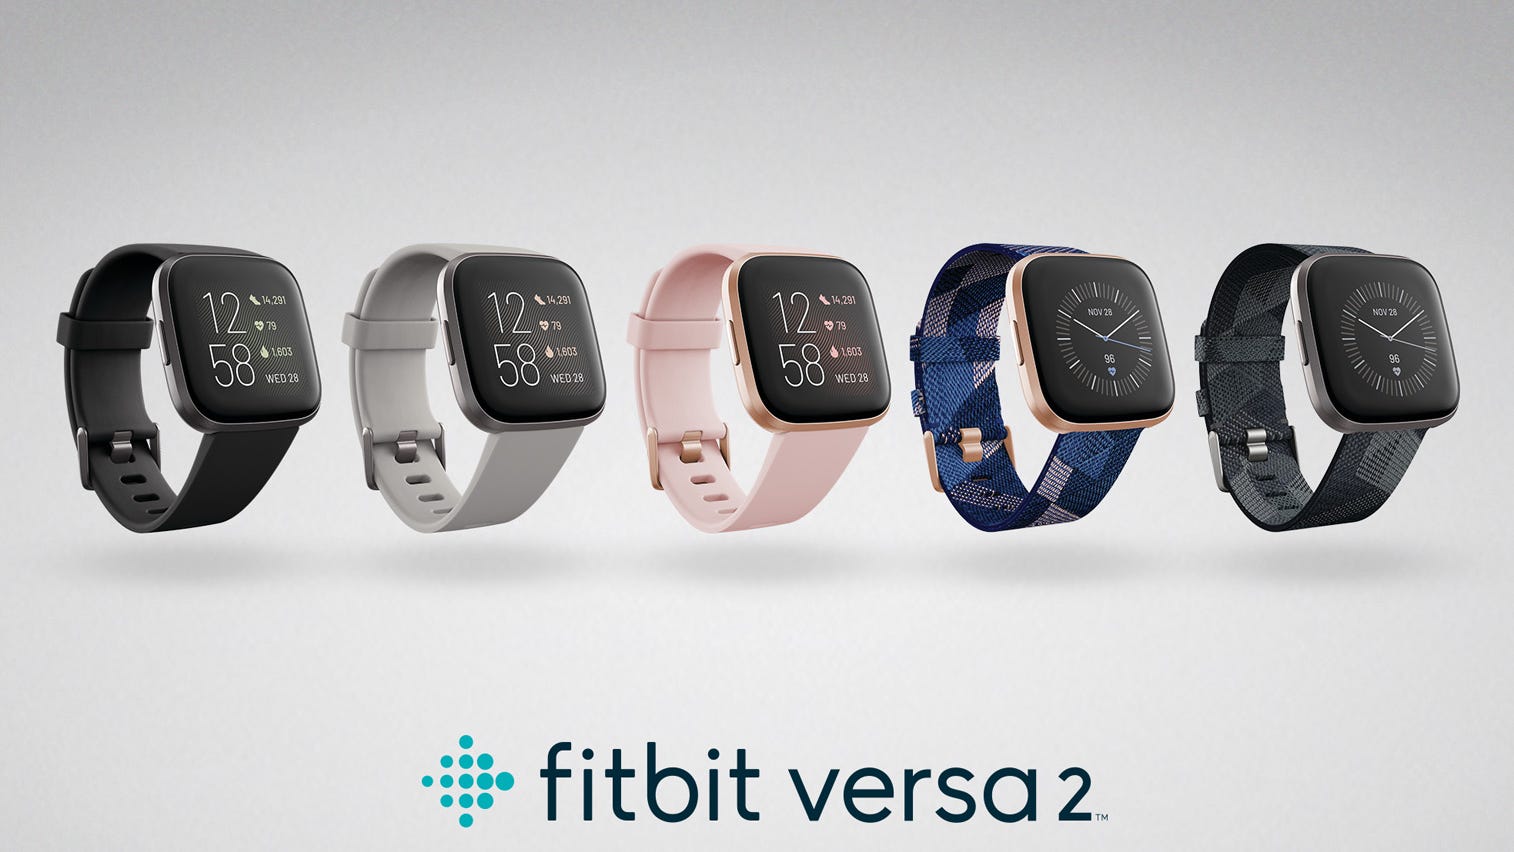 Fitbit 2: Battery screen and Sleep Scare features